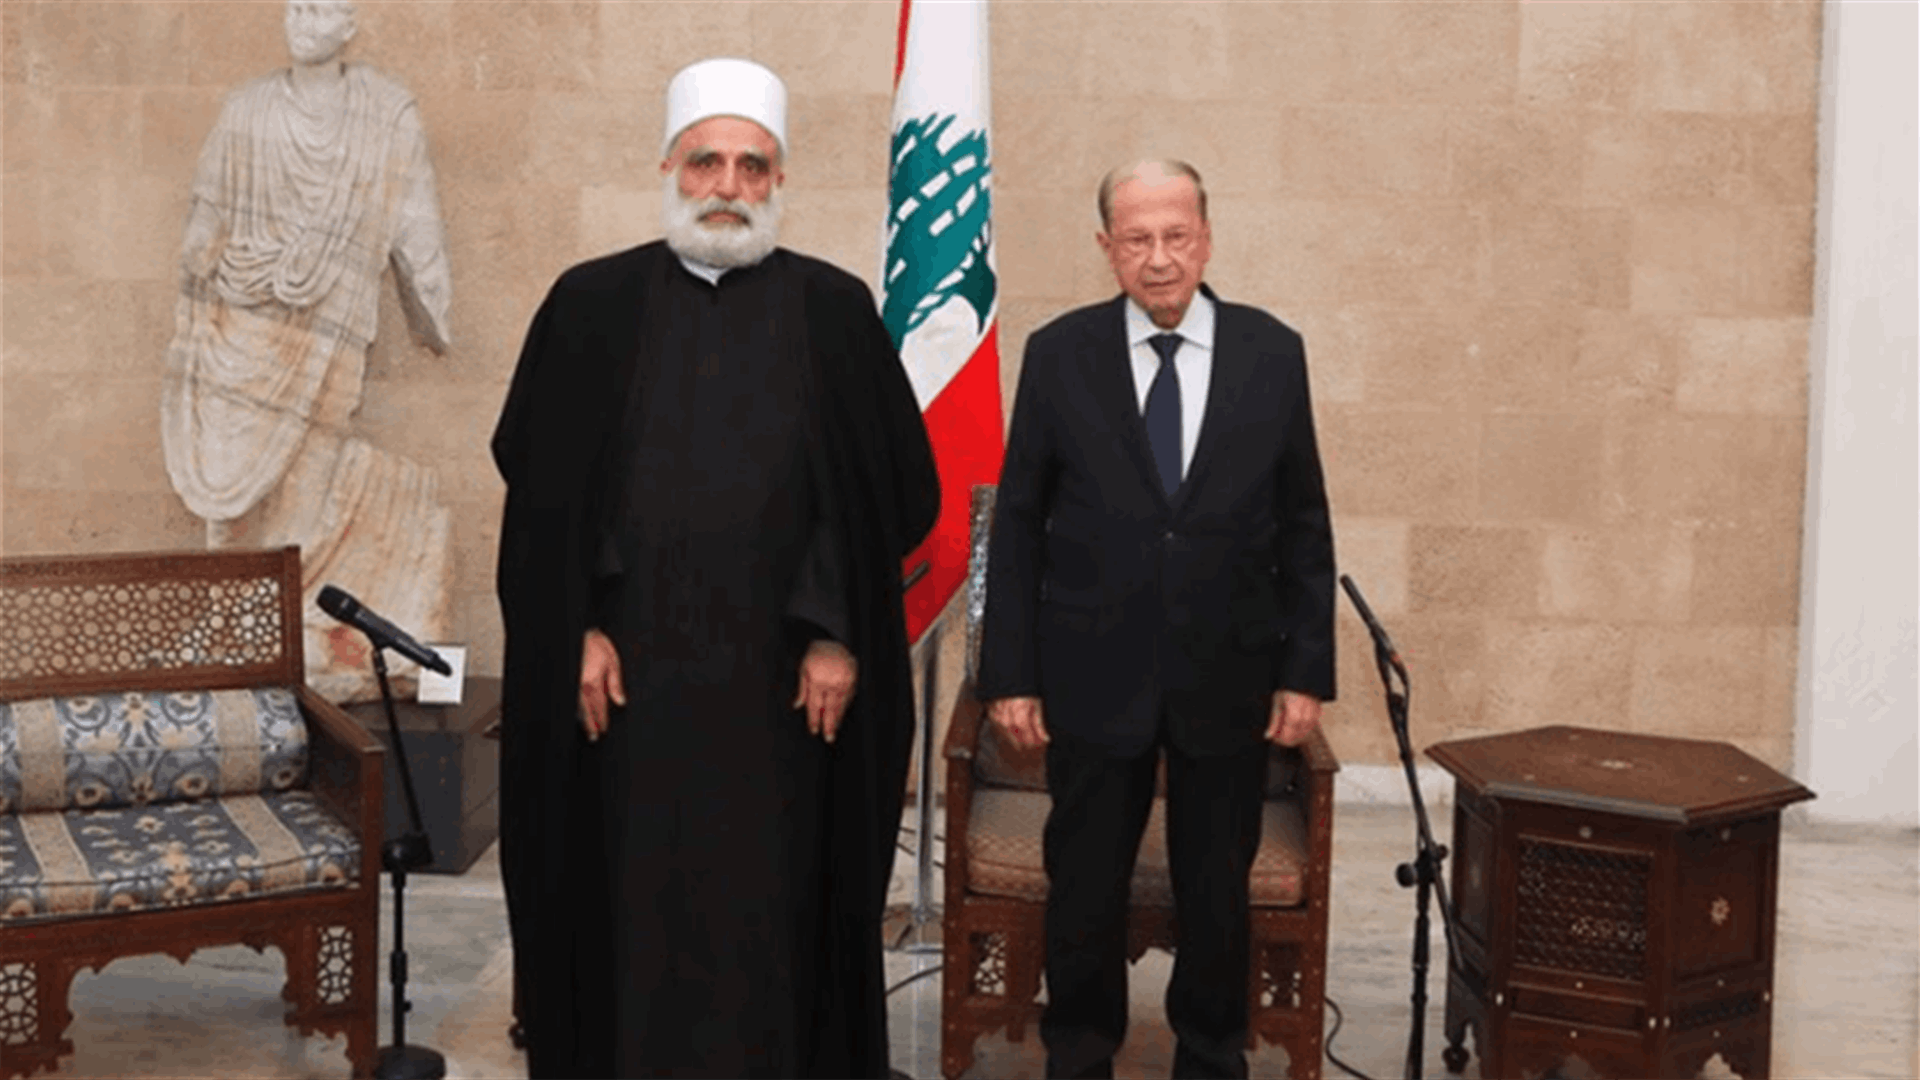 President Aoun receives Druze Sheikh, briefed by Defense Minister on Baghdad visit